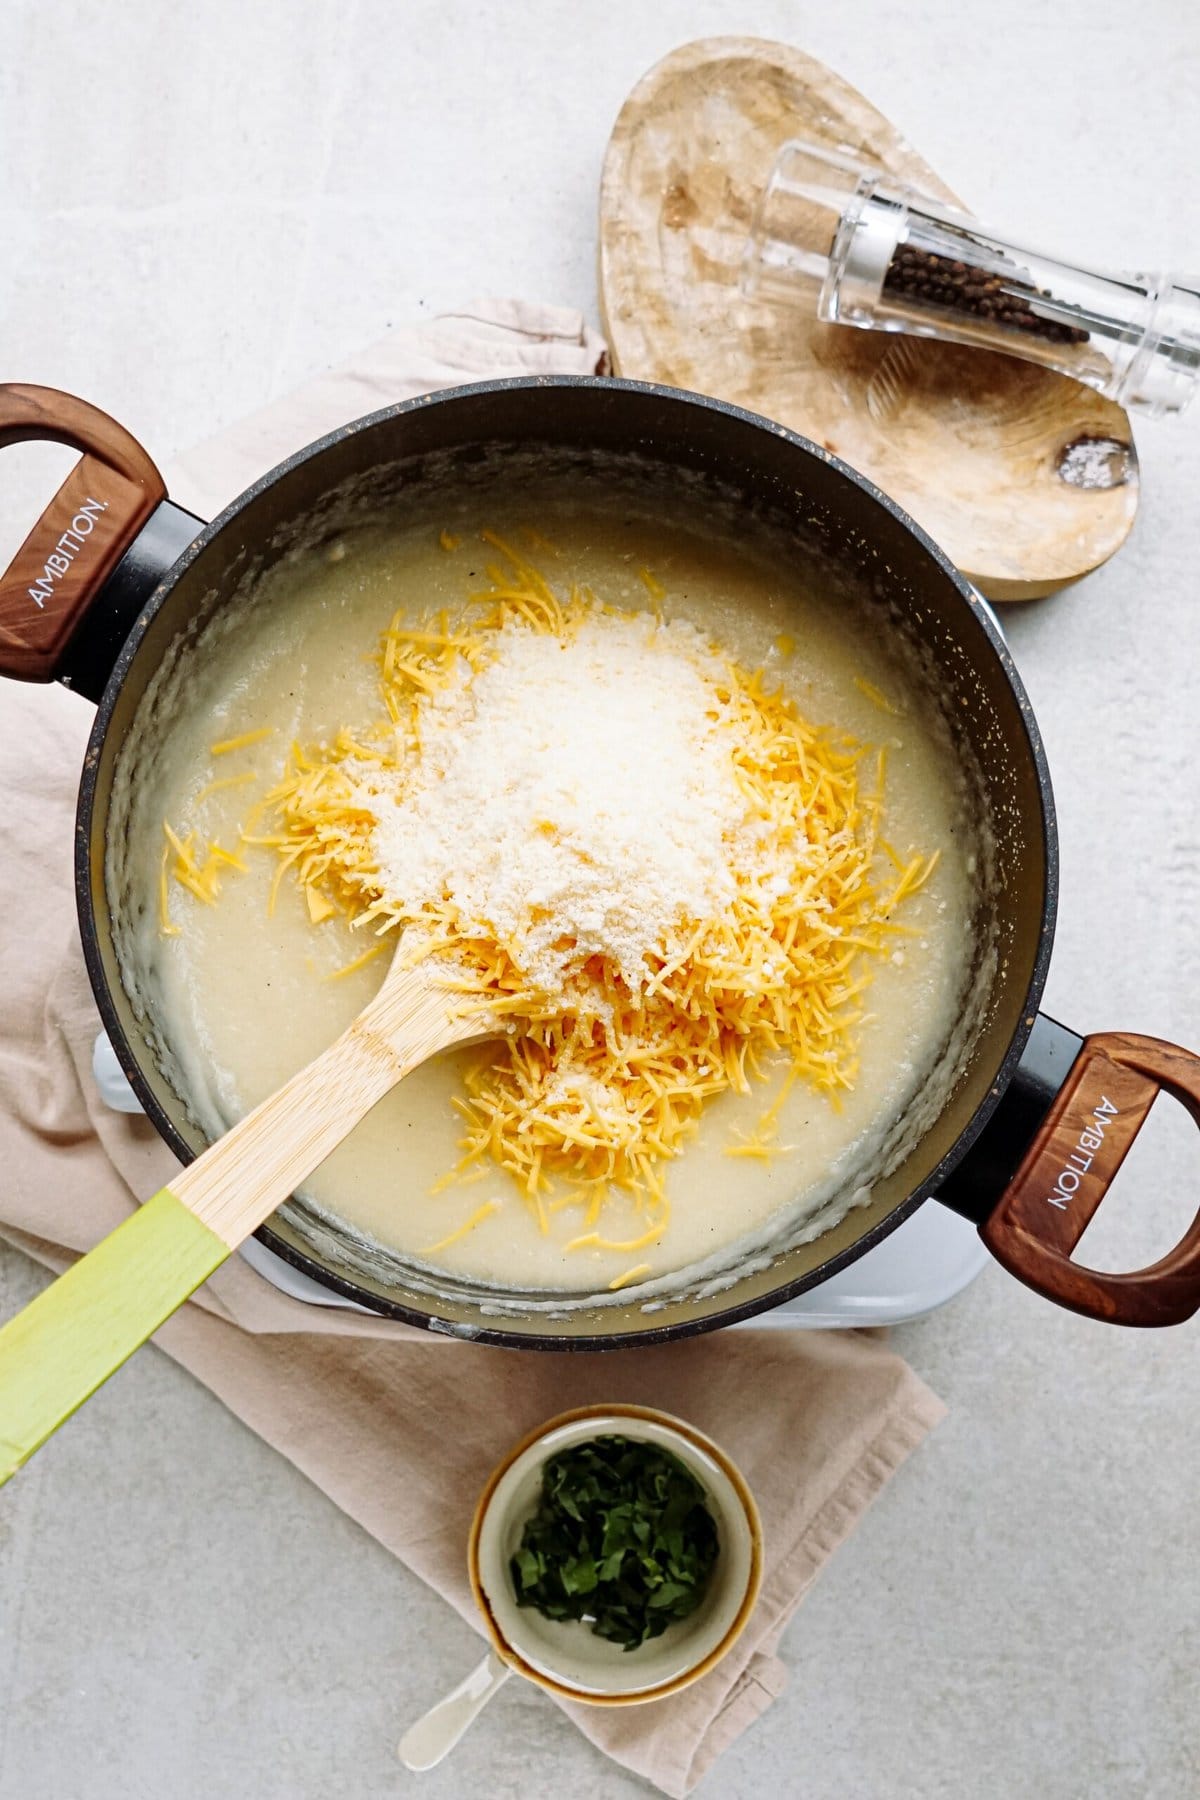 A pot of grits and shredded cheese with a wooden spoon.